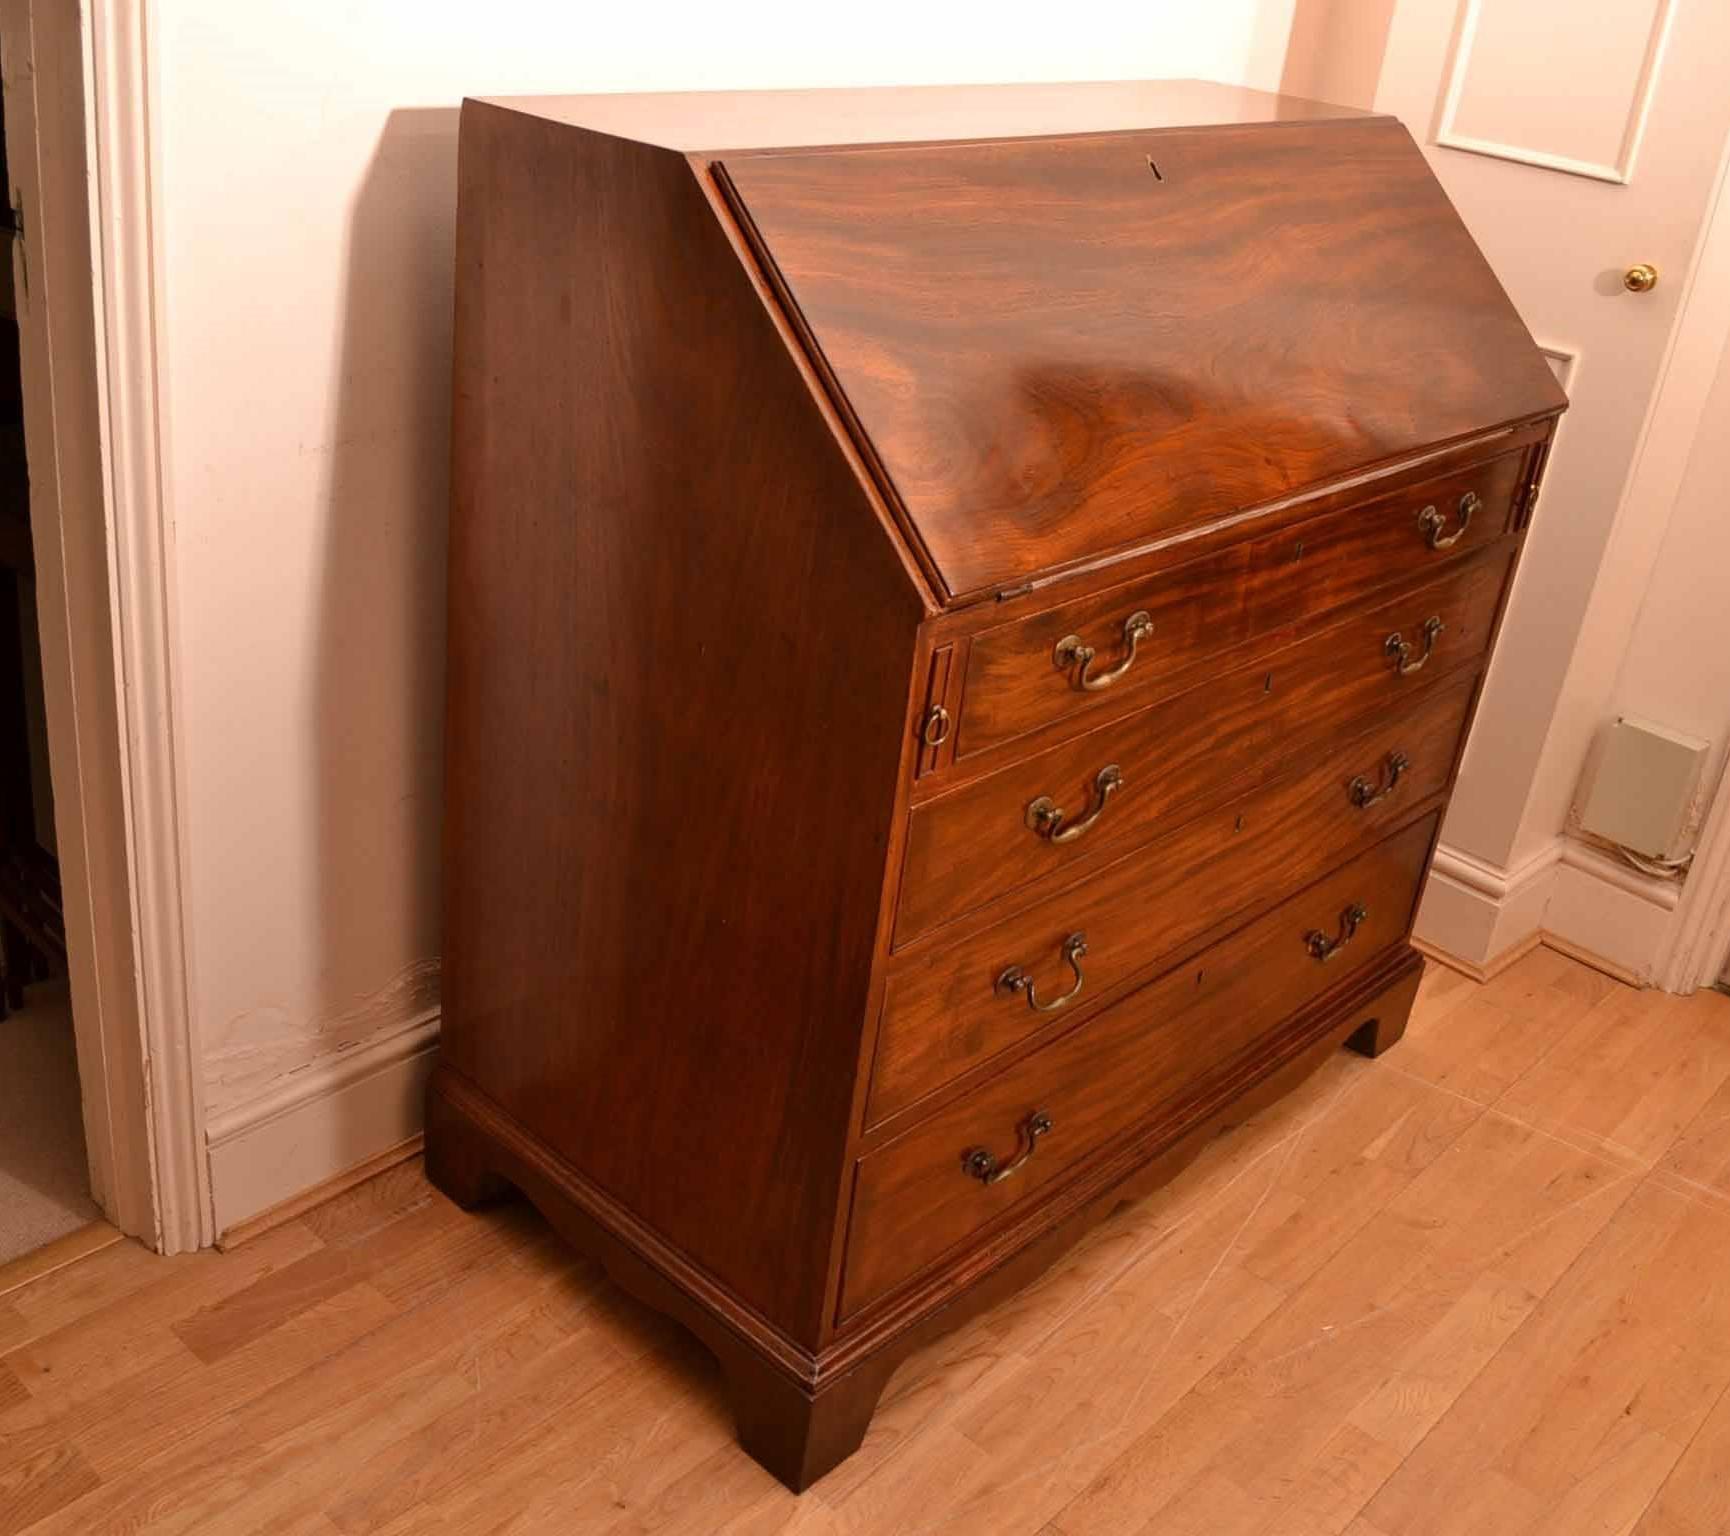 This is an antique mahogany George III bureau with a beautiful fitted interior, circa 1780 in date.
This magnificent piece is made of the finest flame mahogany. There are four large and spacious full width drawers. The interior has four small